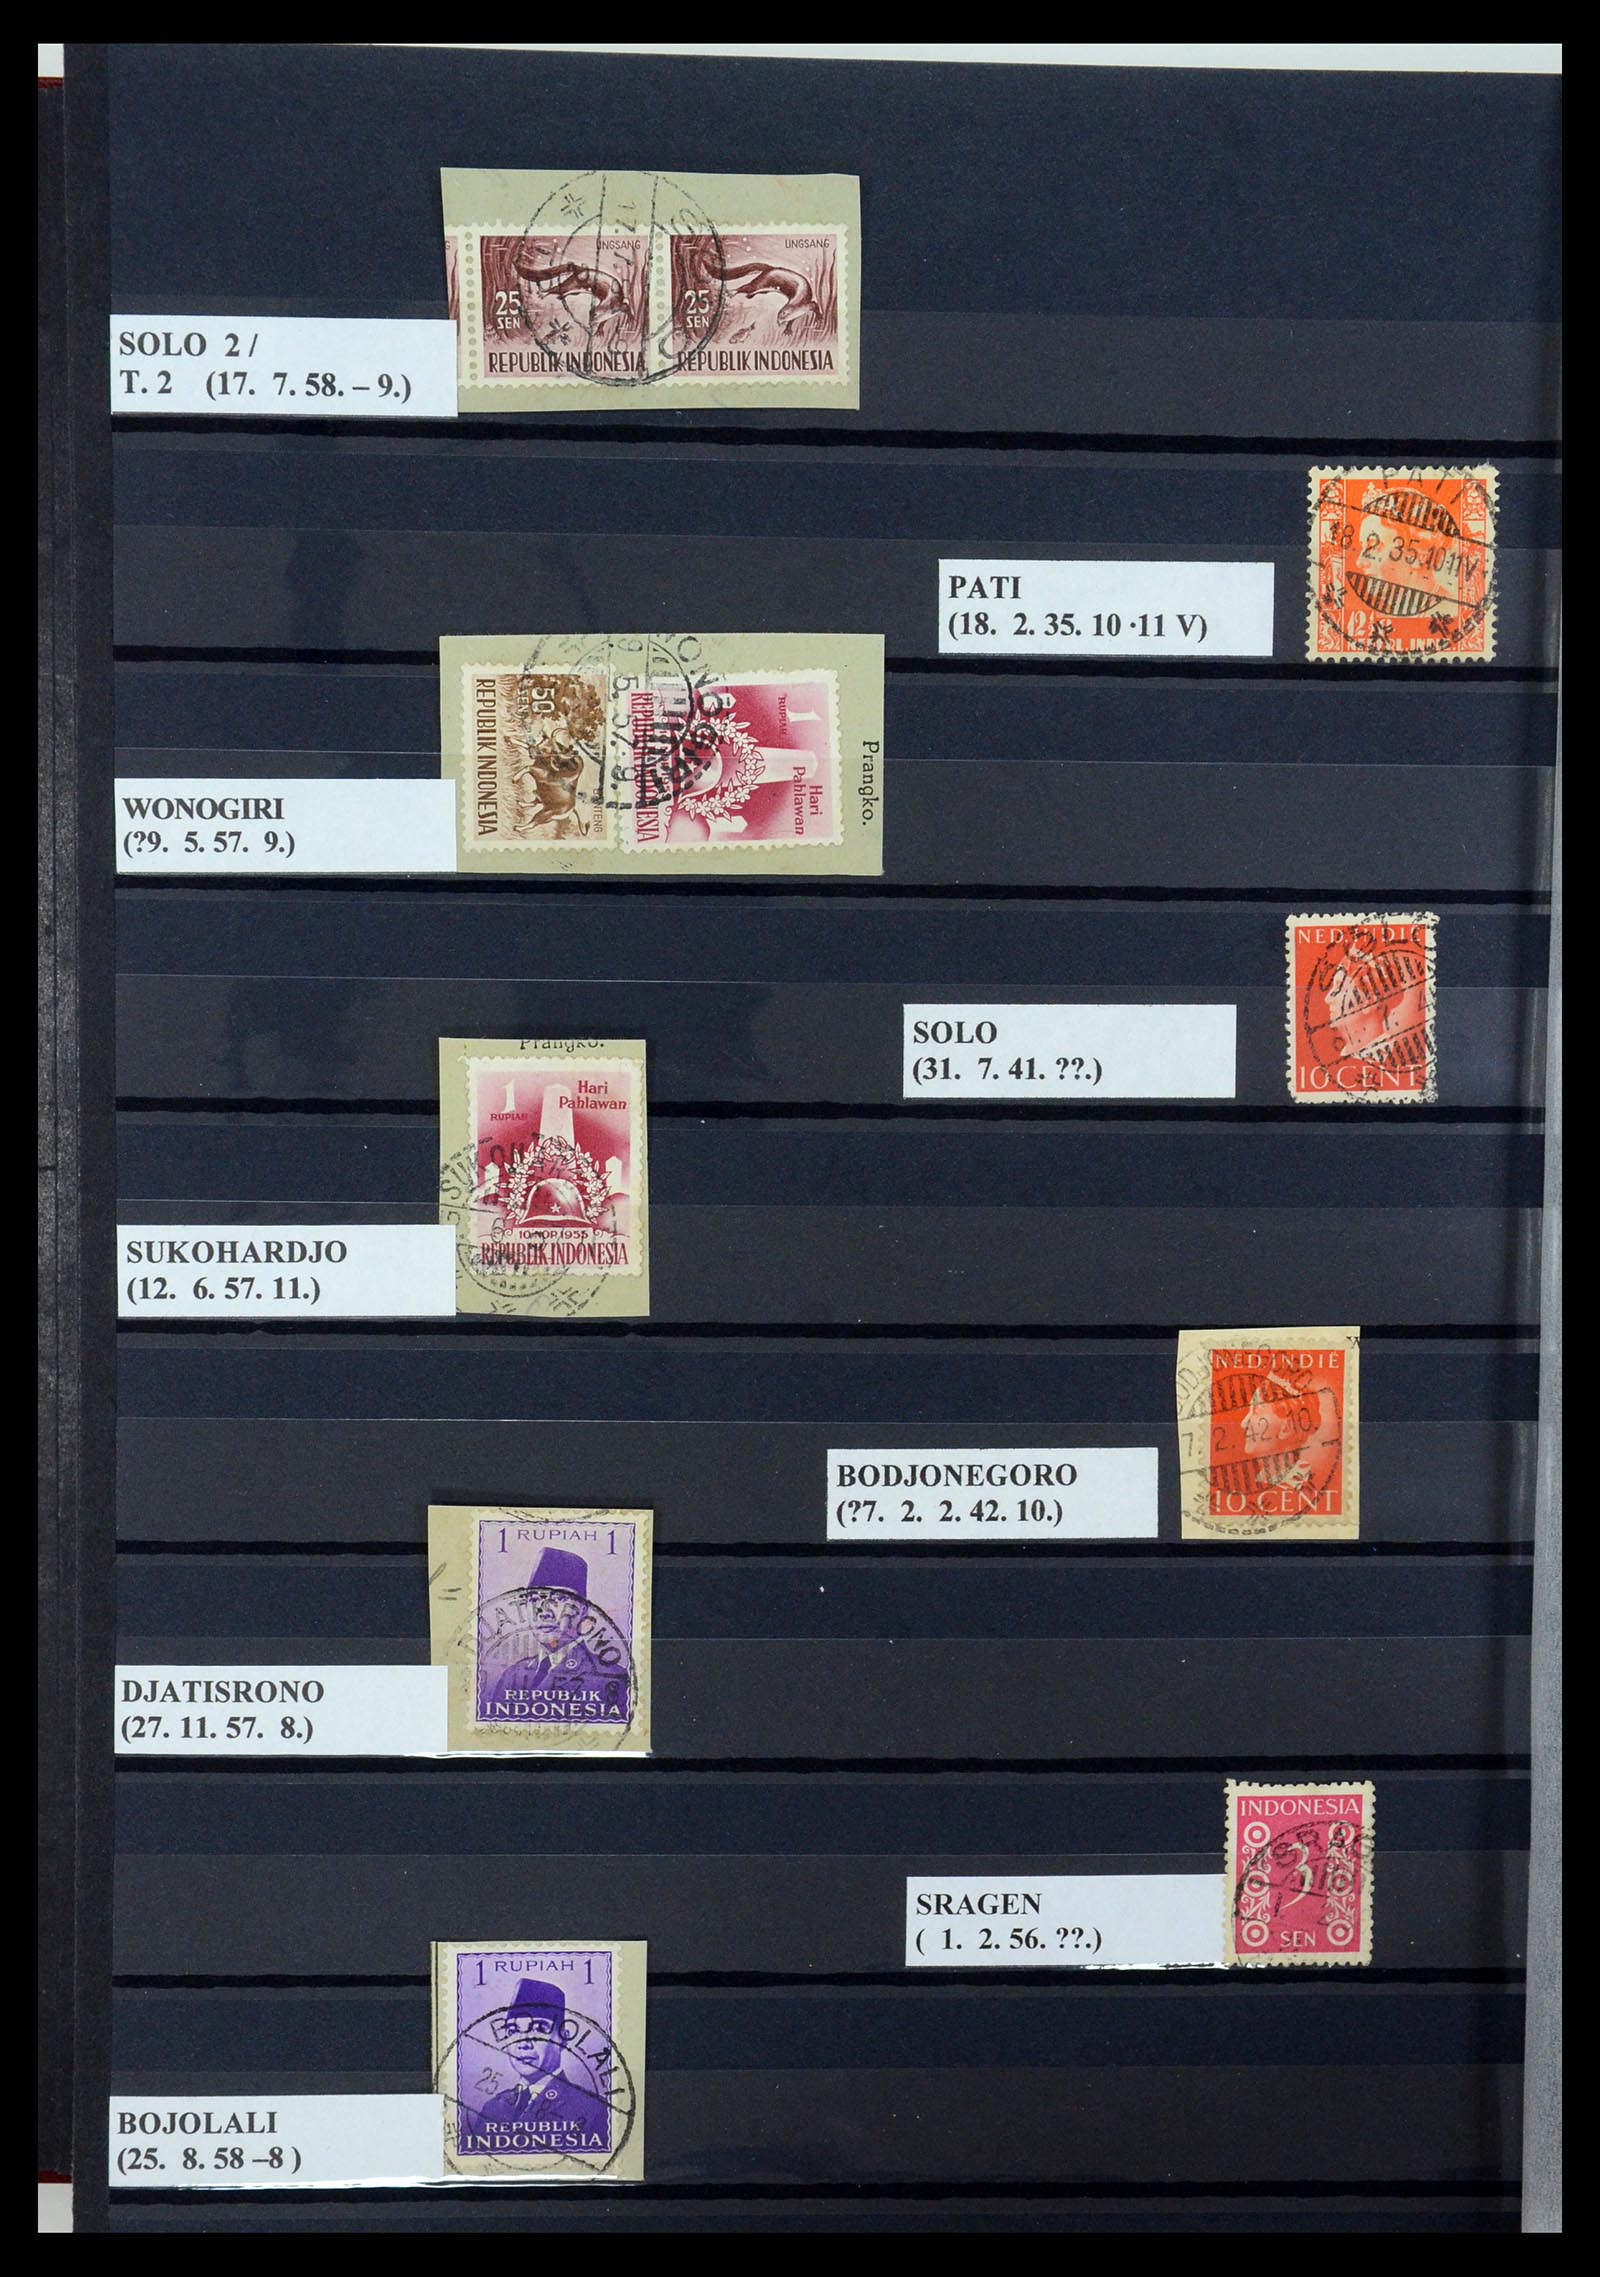 35612 080 - Stamp Collection 35612 Dutch east Indies cancels.